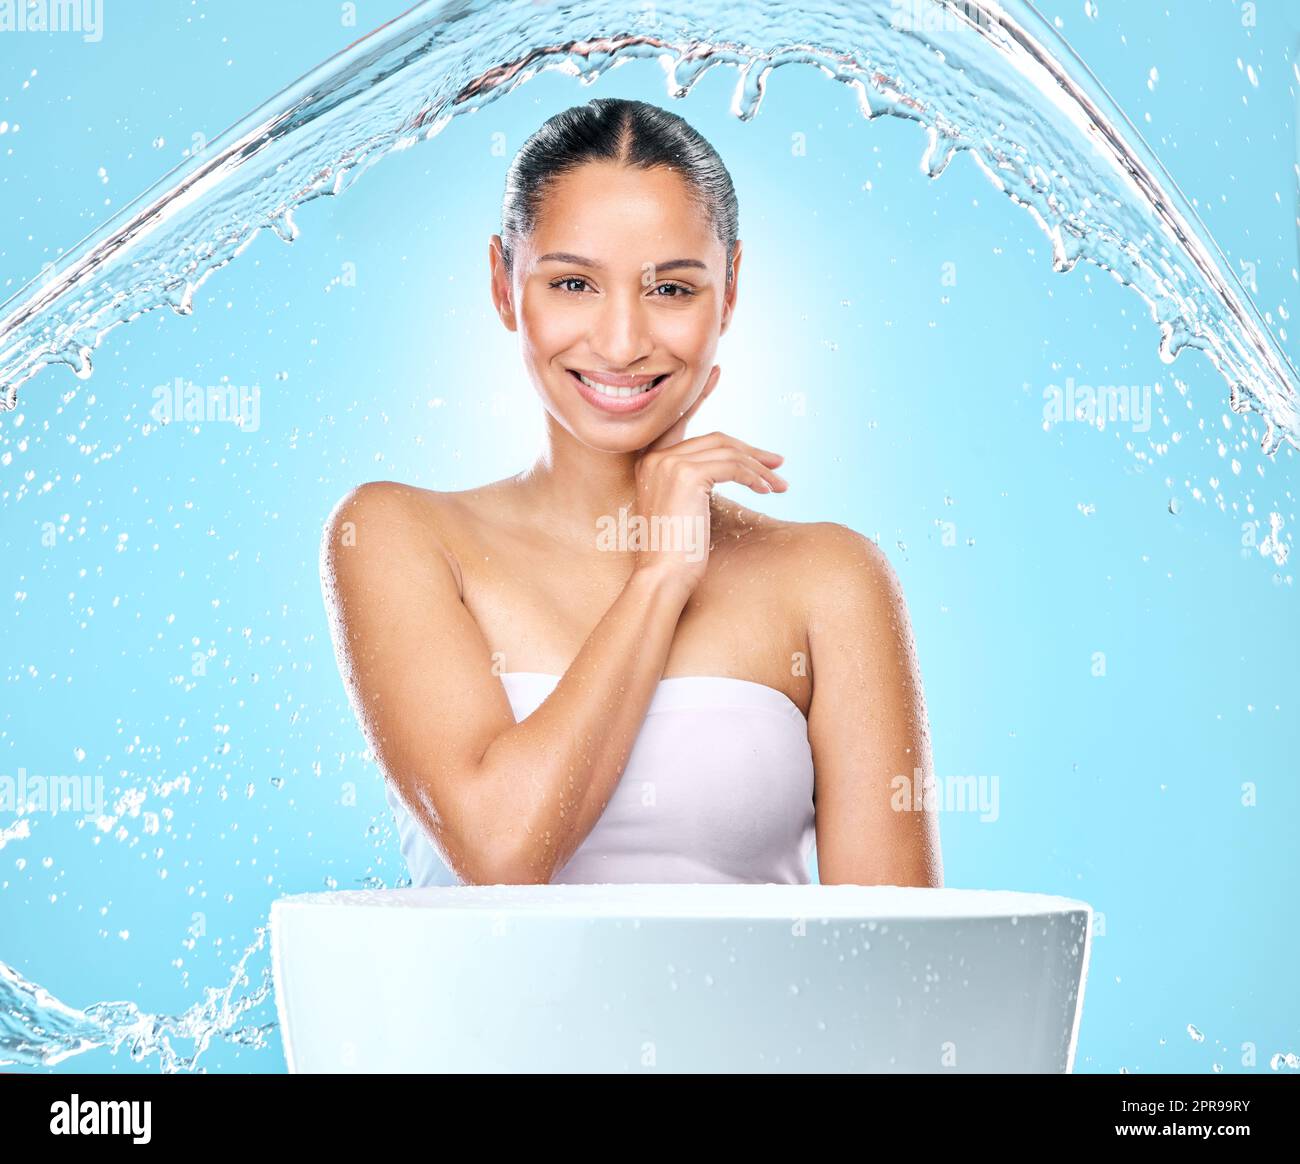 Clean up your act. Studio shot of clean water splashing against a woman. Stock Photo